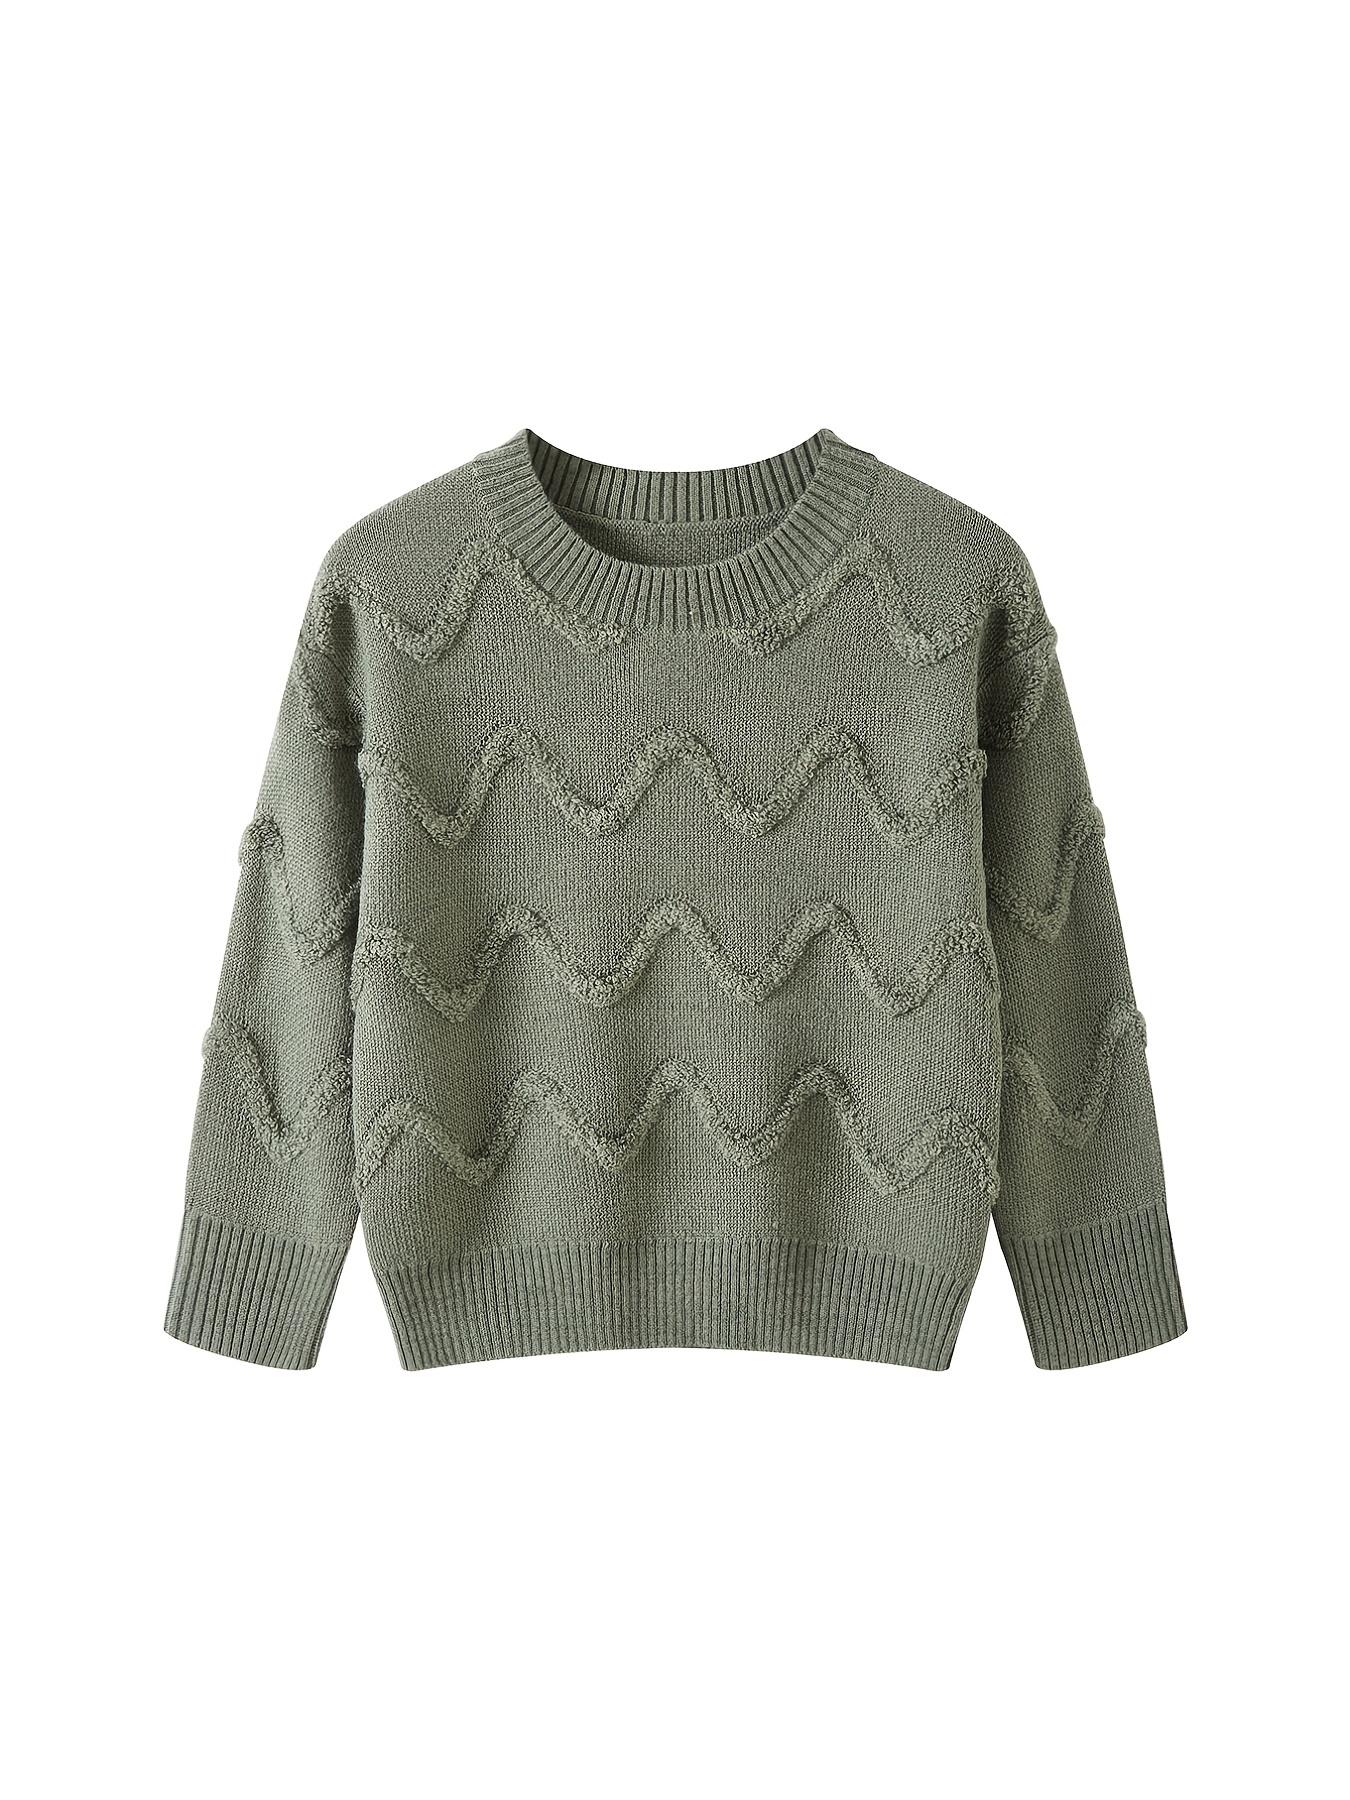 Gvdentm Sweater For Boys Boys Solid Knitted Pullover Sweater Color